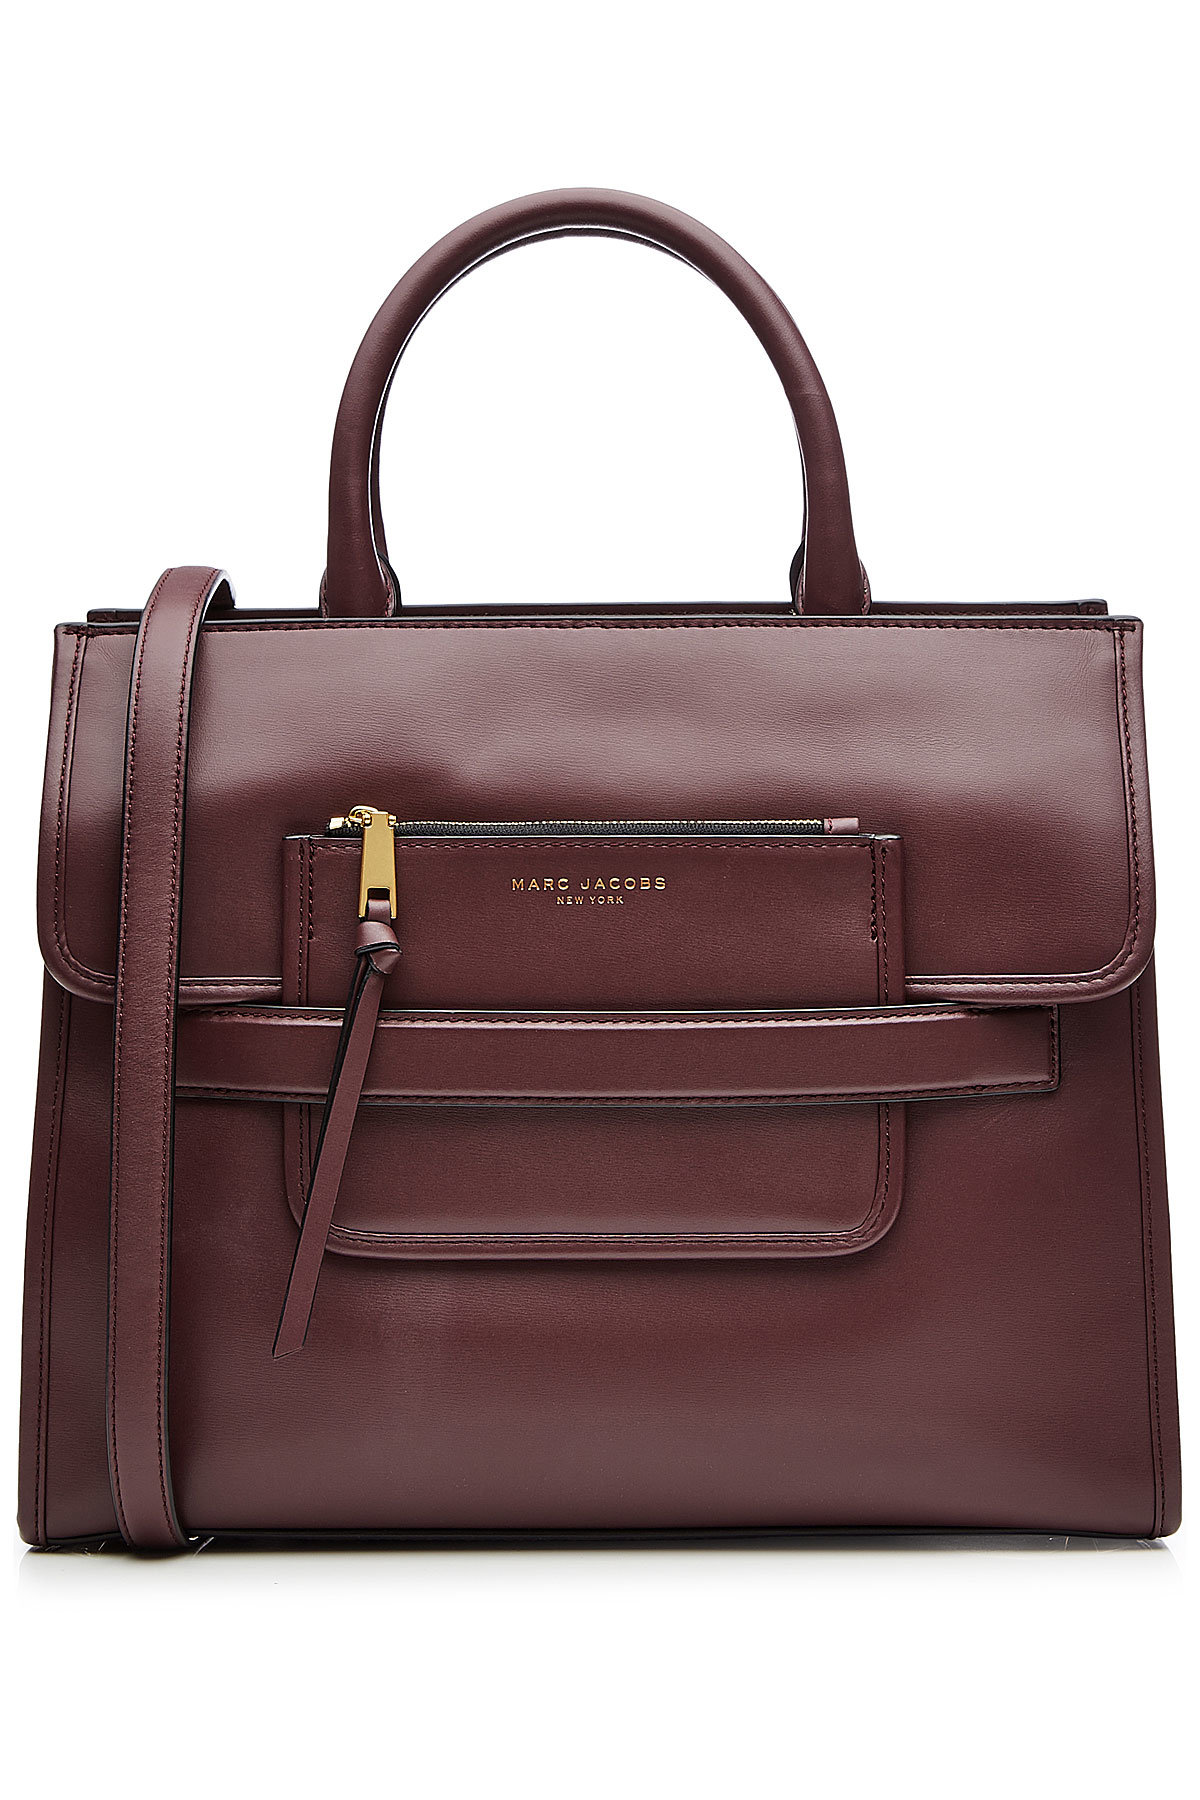 Marc Jacobs - Madison Leather Tote